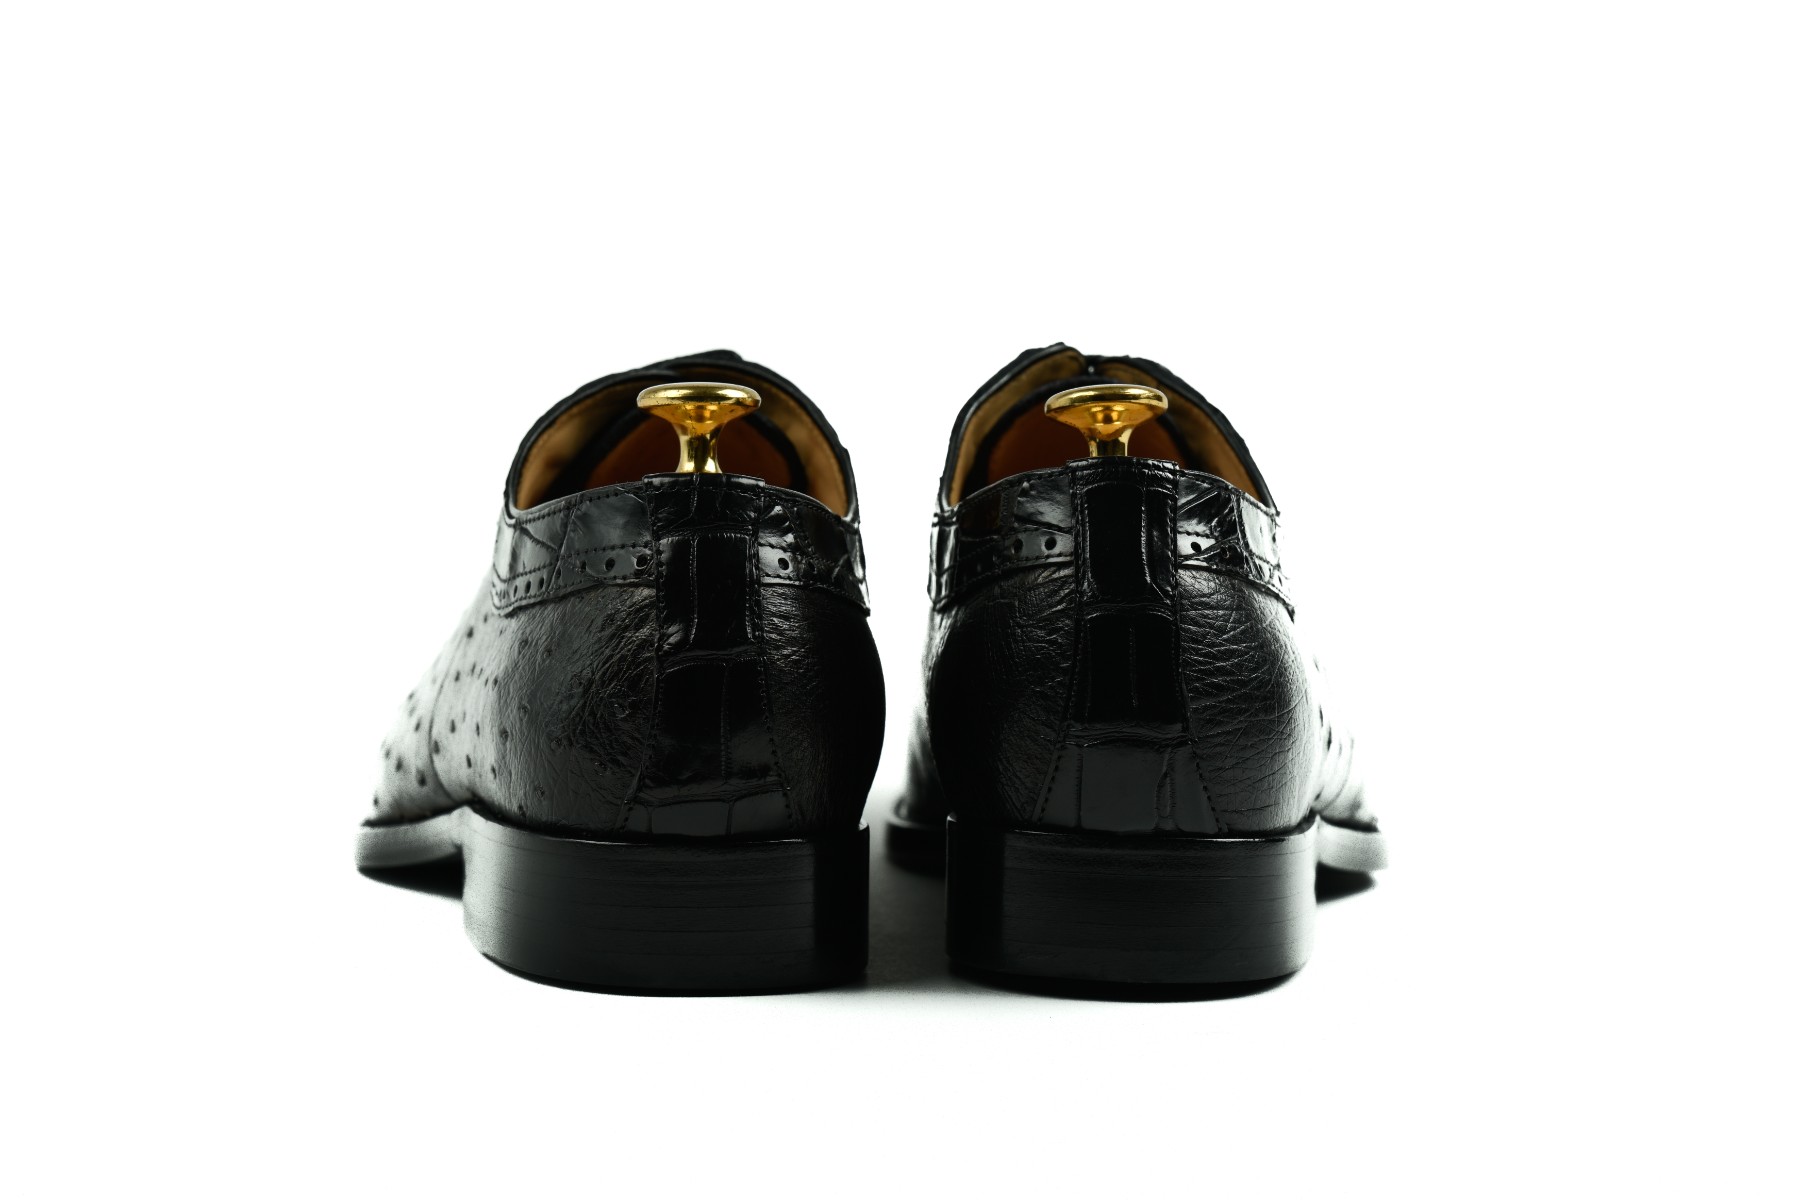 Cordwainers Brier Black Alligator Leather Shoe